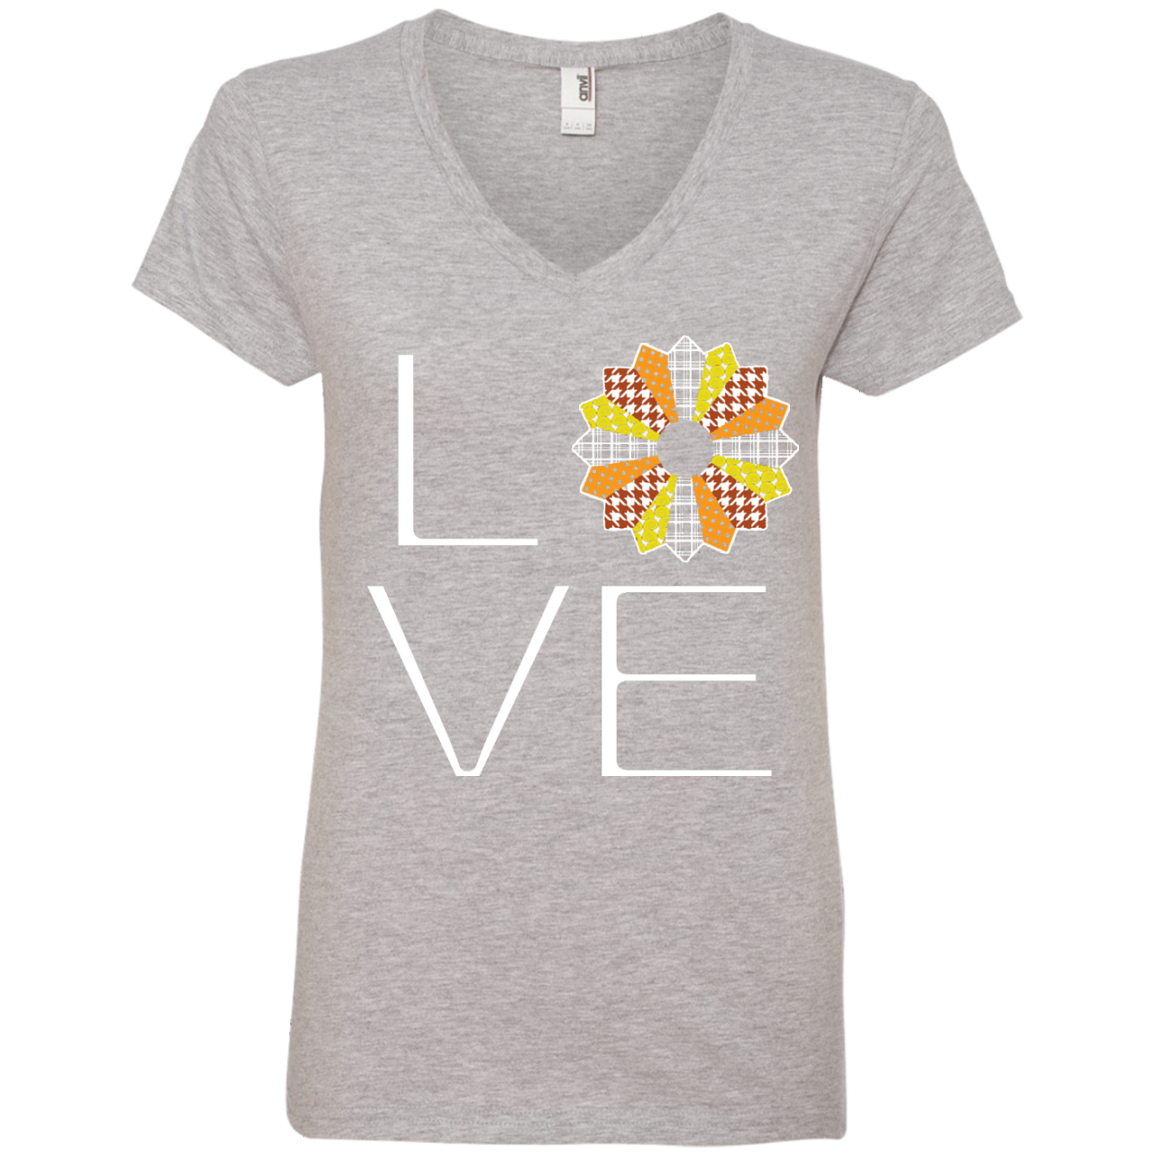 LOVE Quilting (Fall Colors) Ladies V-neck Tee - Crafter4Life - 2